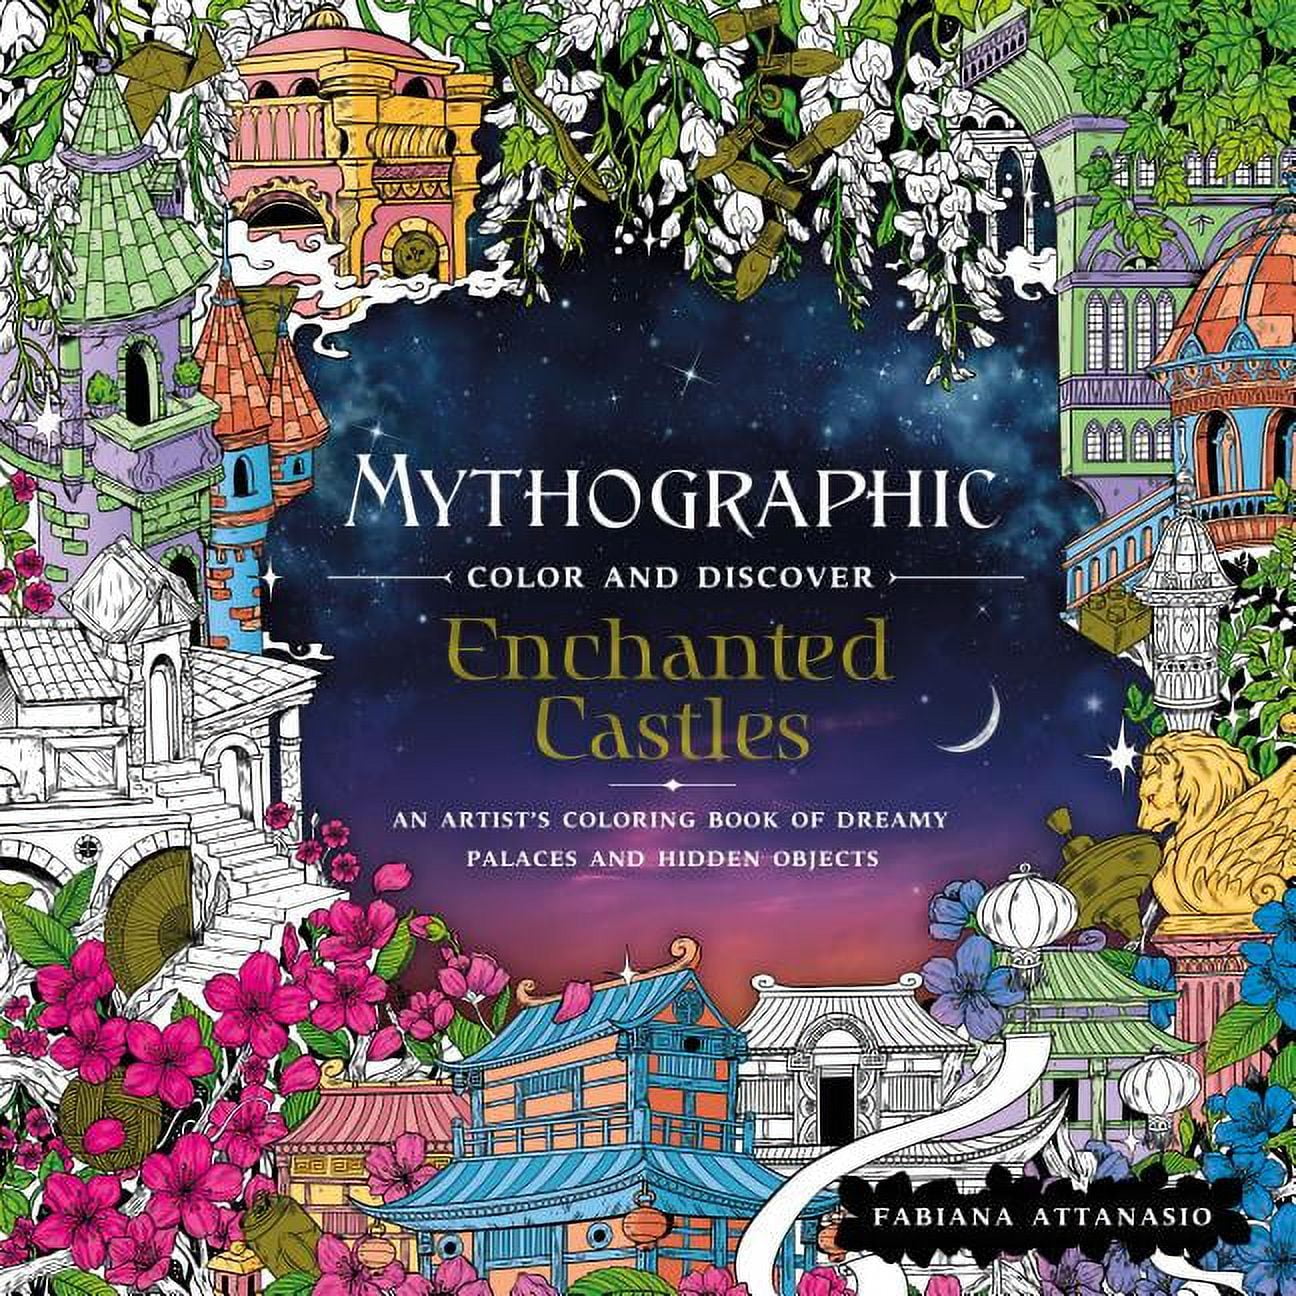 Mythographic Color and Discover: Enchanted Castles: An Artist's Coloring Book of Dreamy Palaces and Hidden Objects [Book]